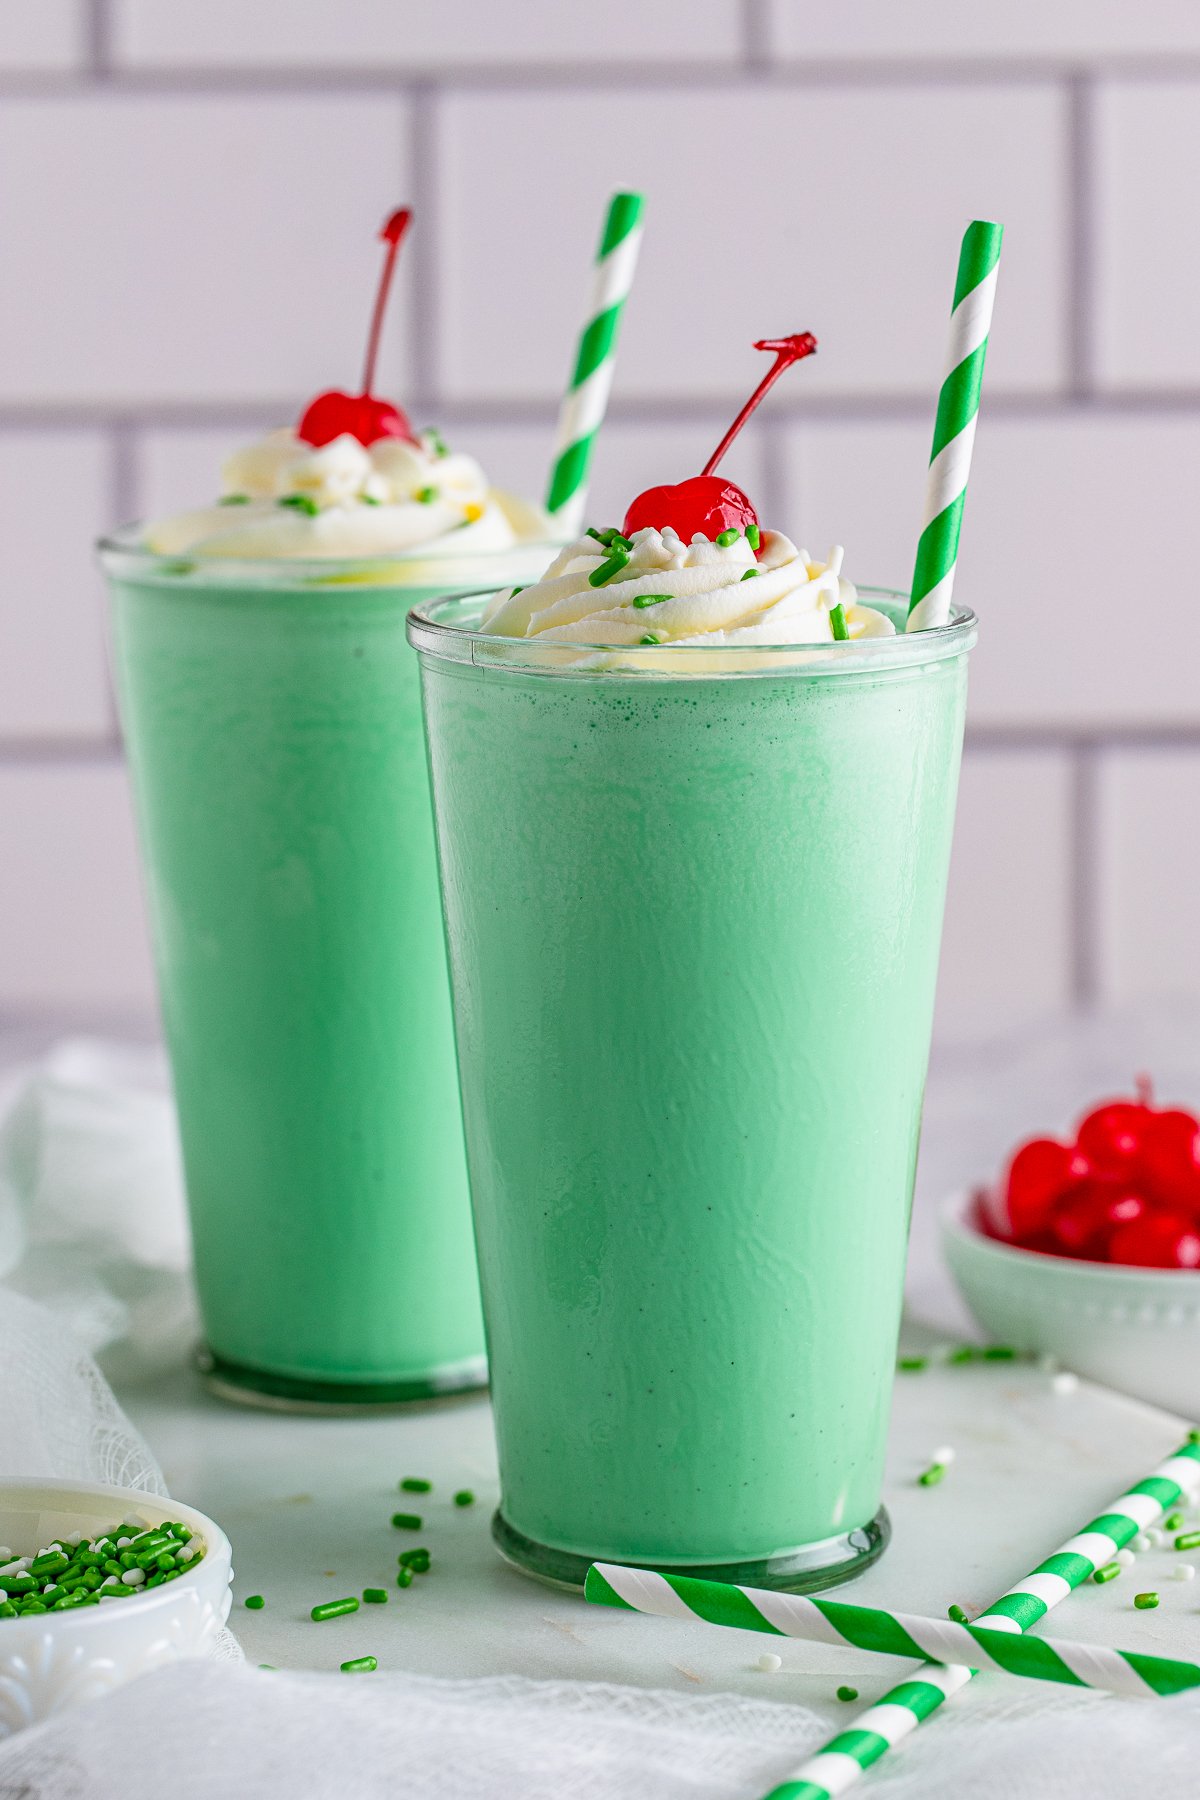 Photo of two Shamrock Shakes in clear glasses side by side with green and white swirl straws served with whipped cream and a cherry on top - by This Silly Girl's Kitchen.